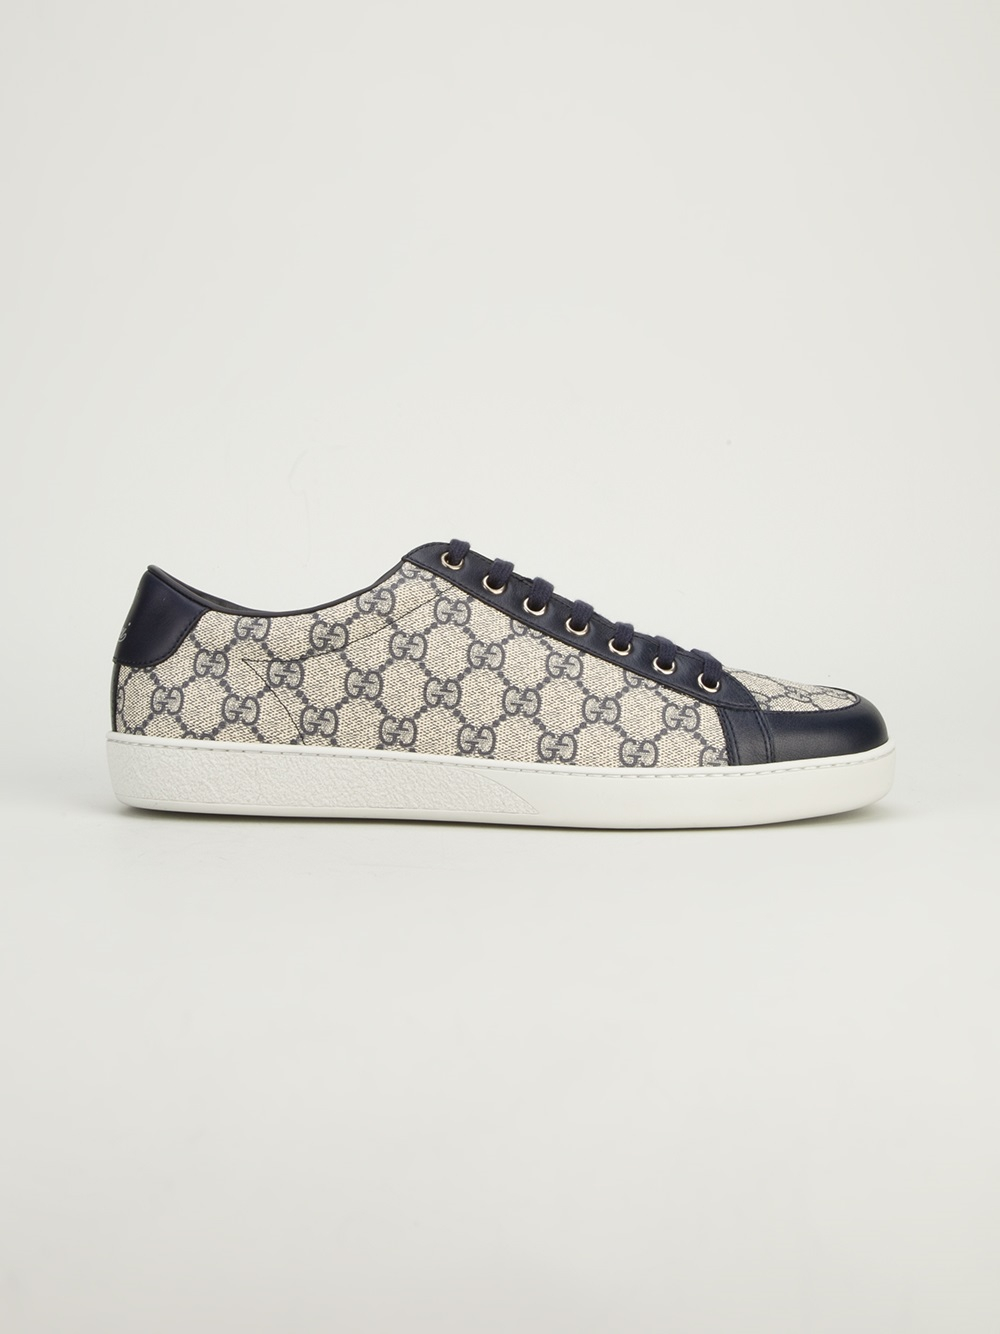 Lyst - Gucci Trainer in Black for Men